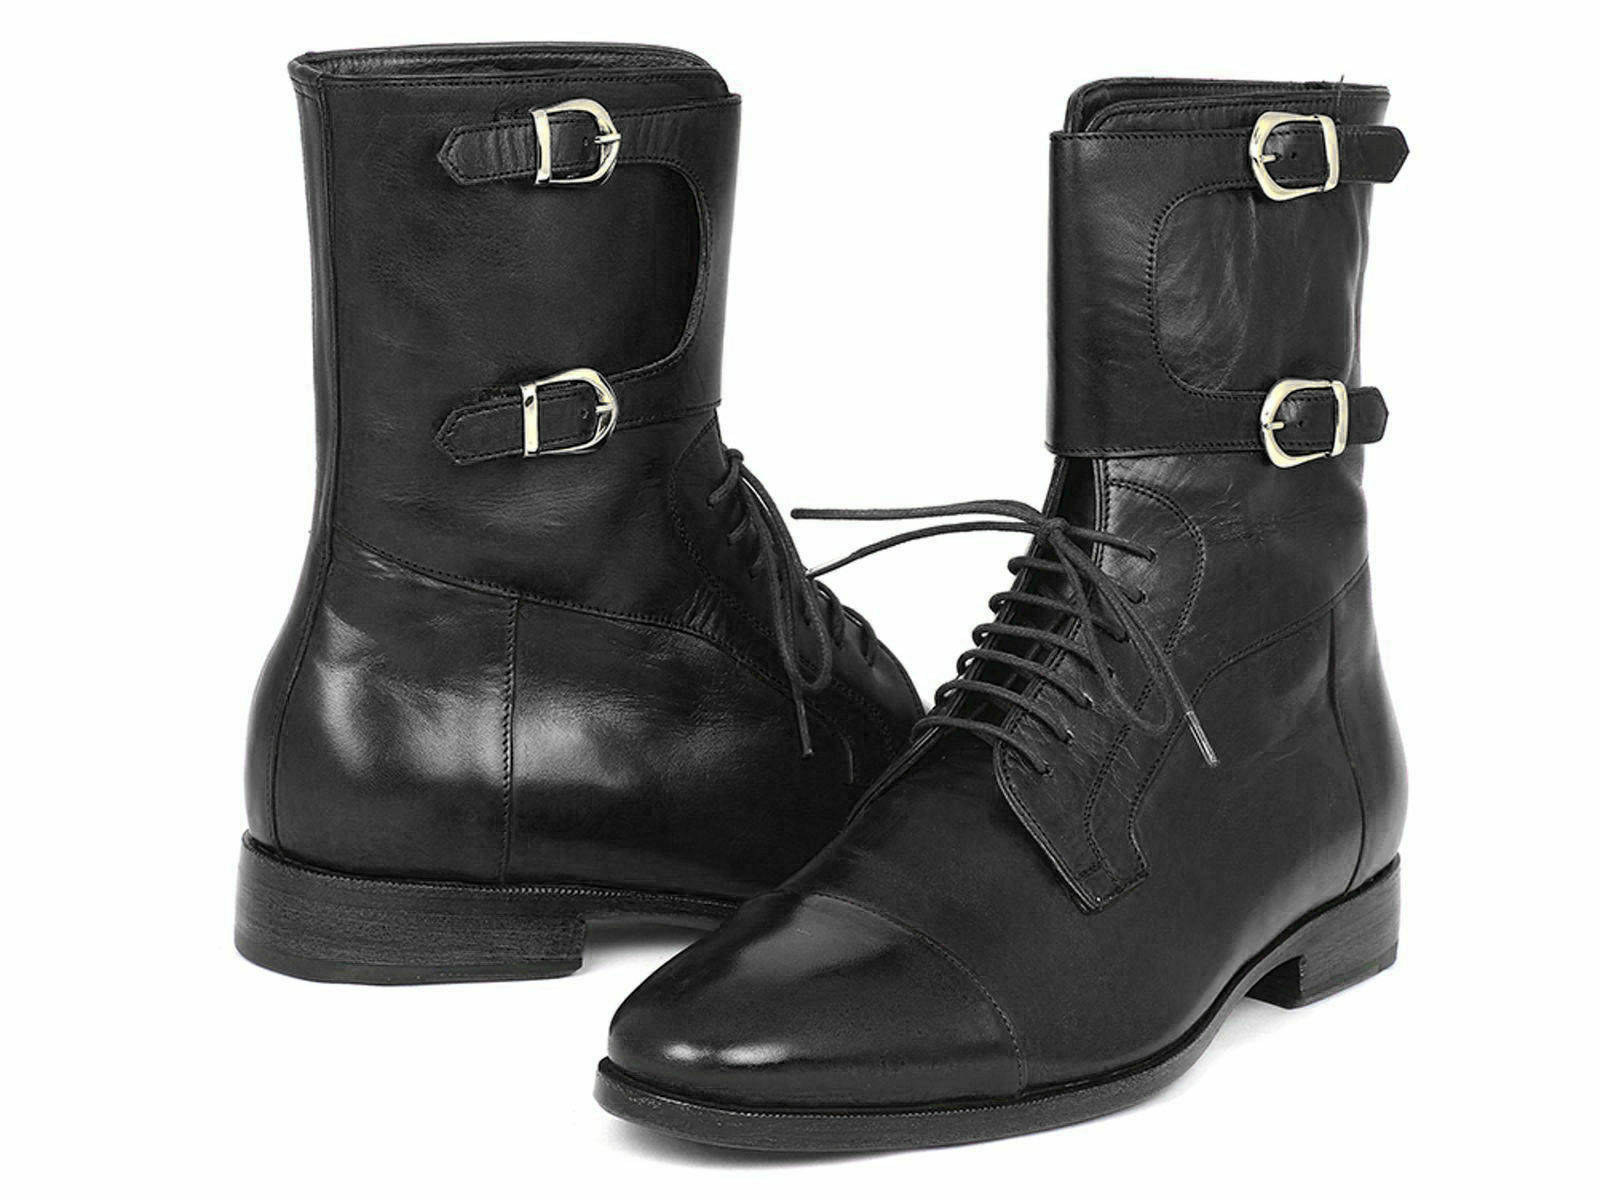 High Ankle Boot Monks Black Double Buckle Strap Cap Toe Premium Quality Leather